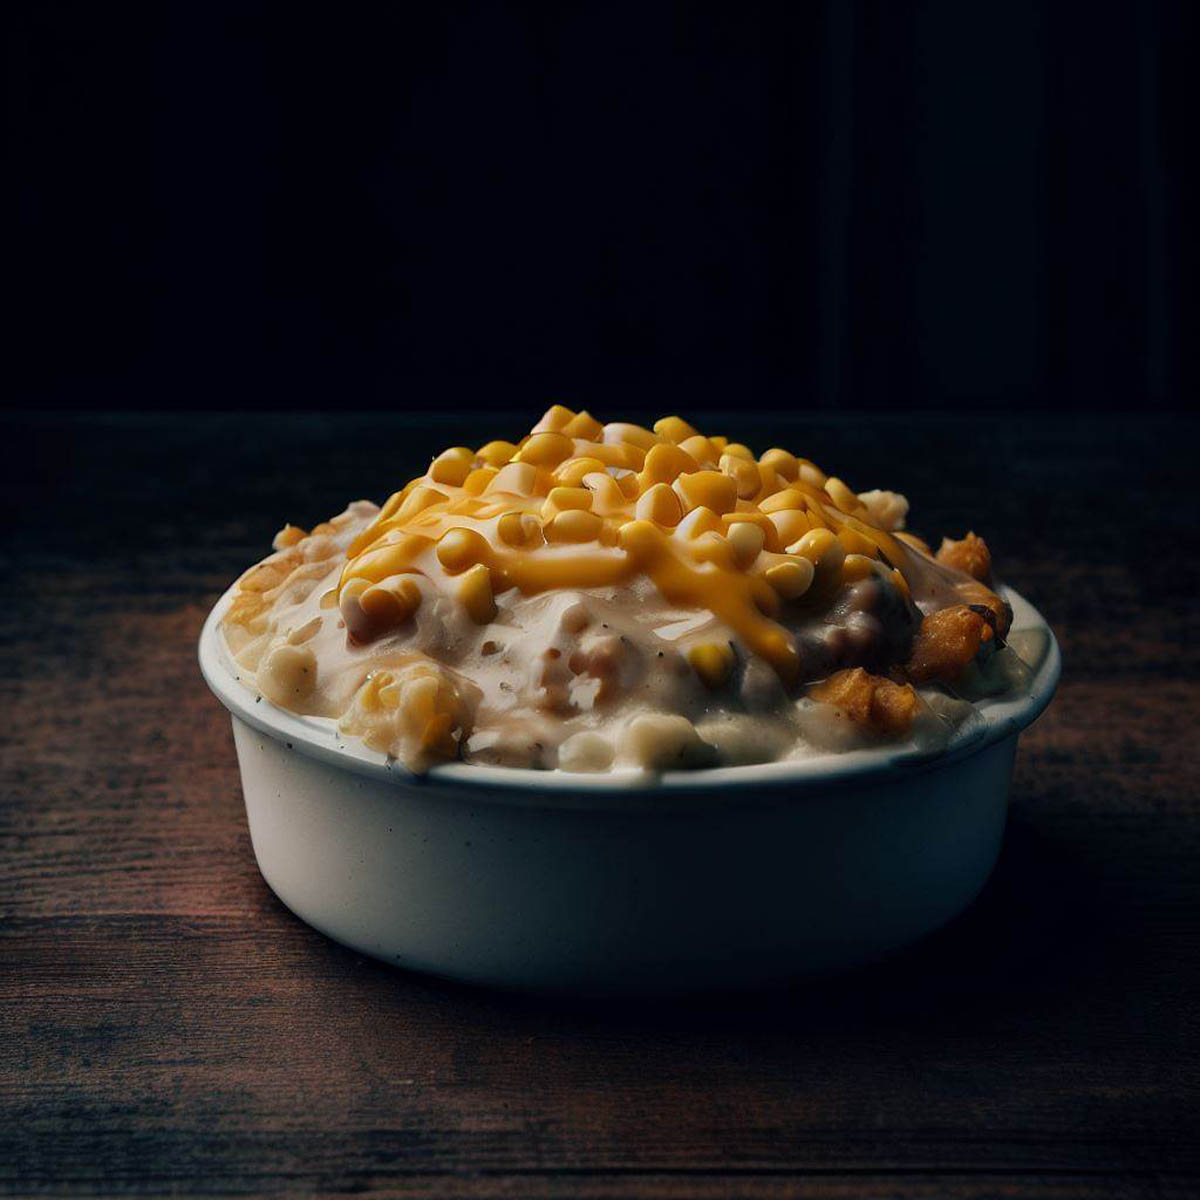 A single serving of the finished KFC Famous Bowl Casserole in a white ceramic bowl.